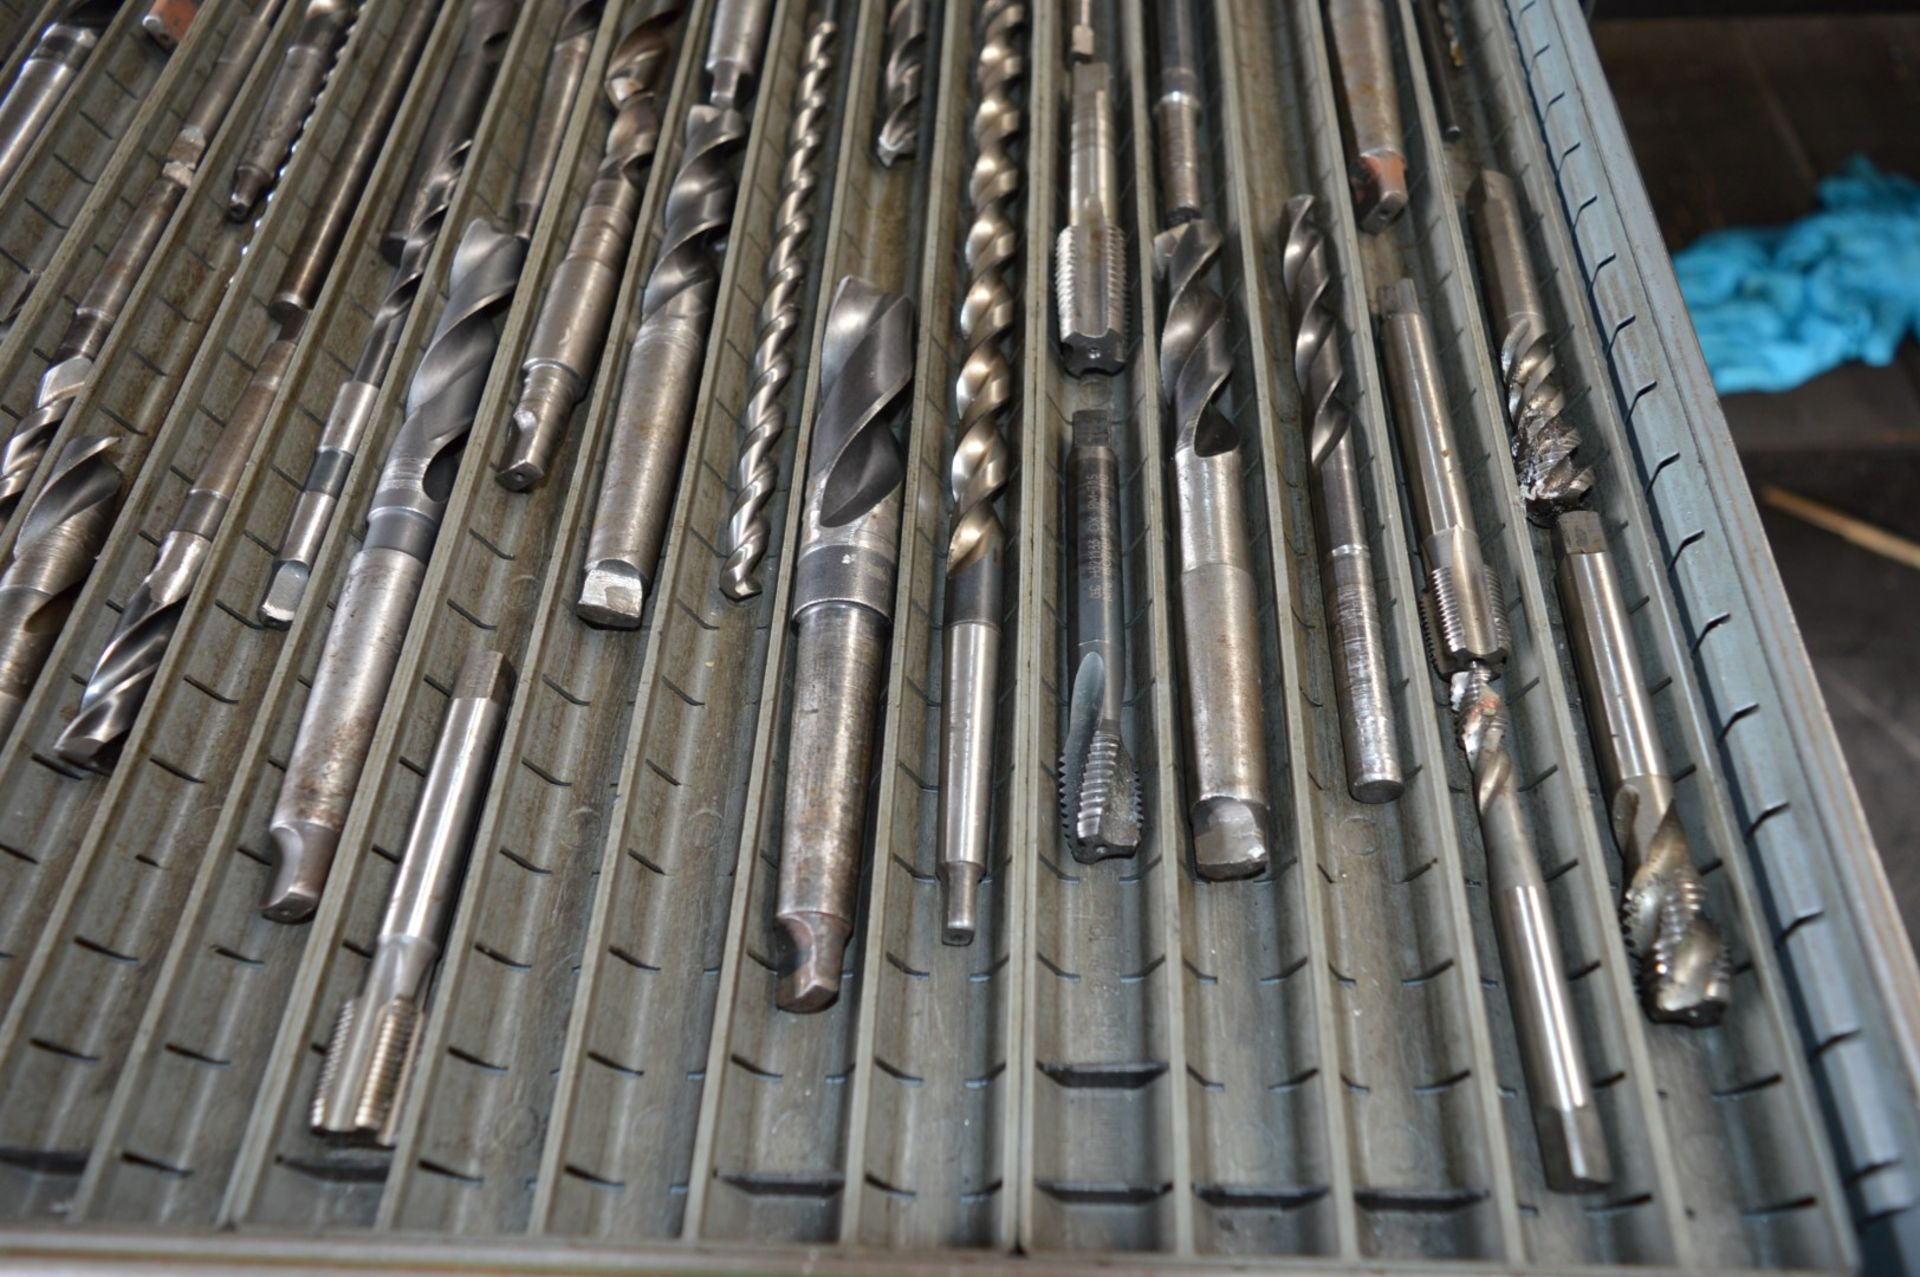 1 x Assorted Lot of Machine Drill Bits - Information to Follow - Please See Pictures Provided - - Image 10 of 11